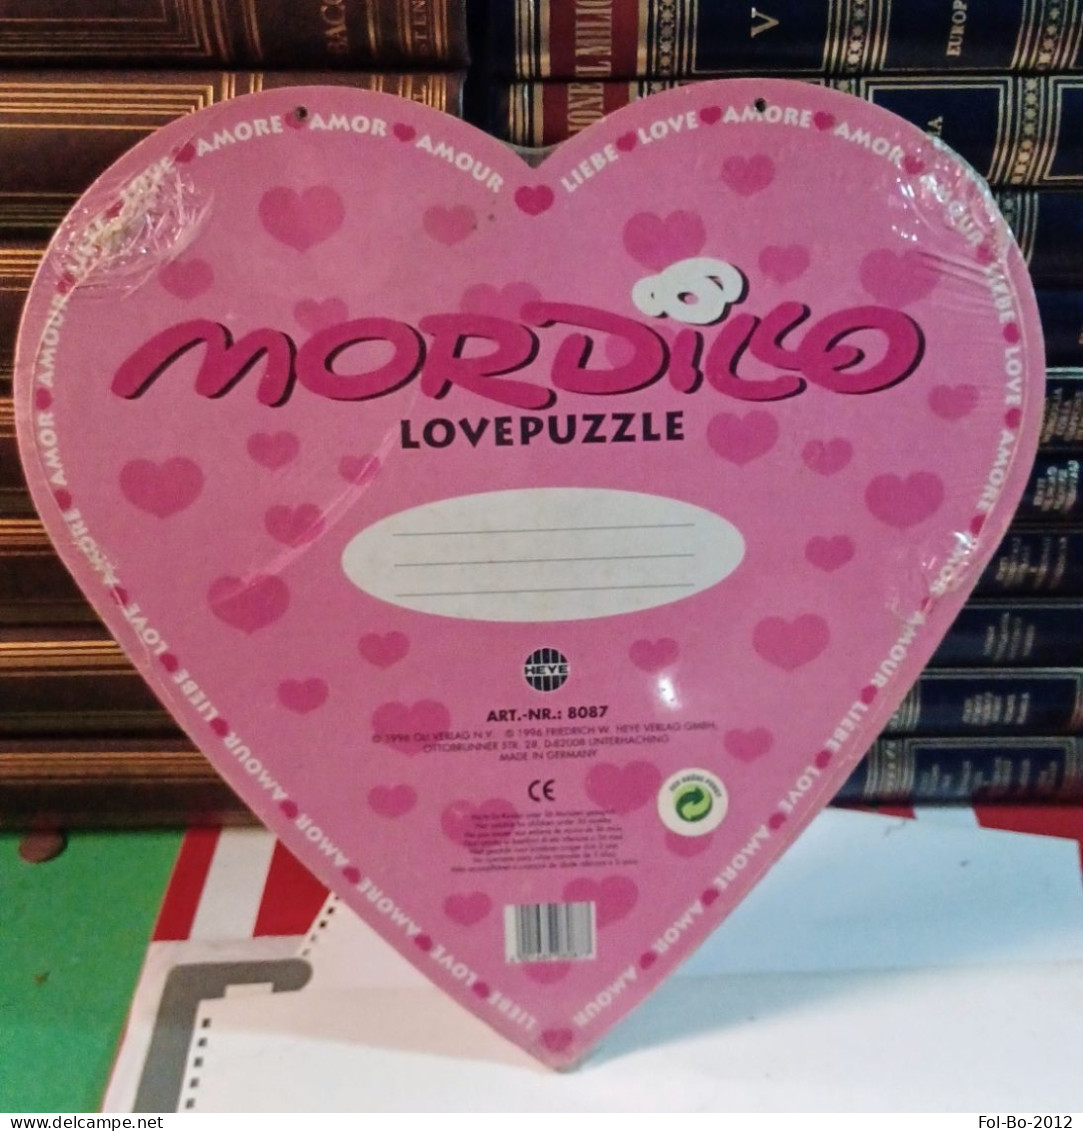 MORDILLO Lovepuzzle 1996 Made Germany .in Blister - Puzzle Games